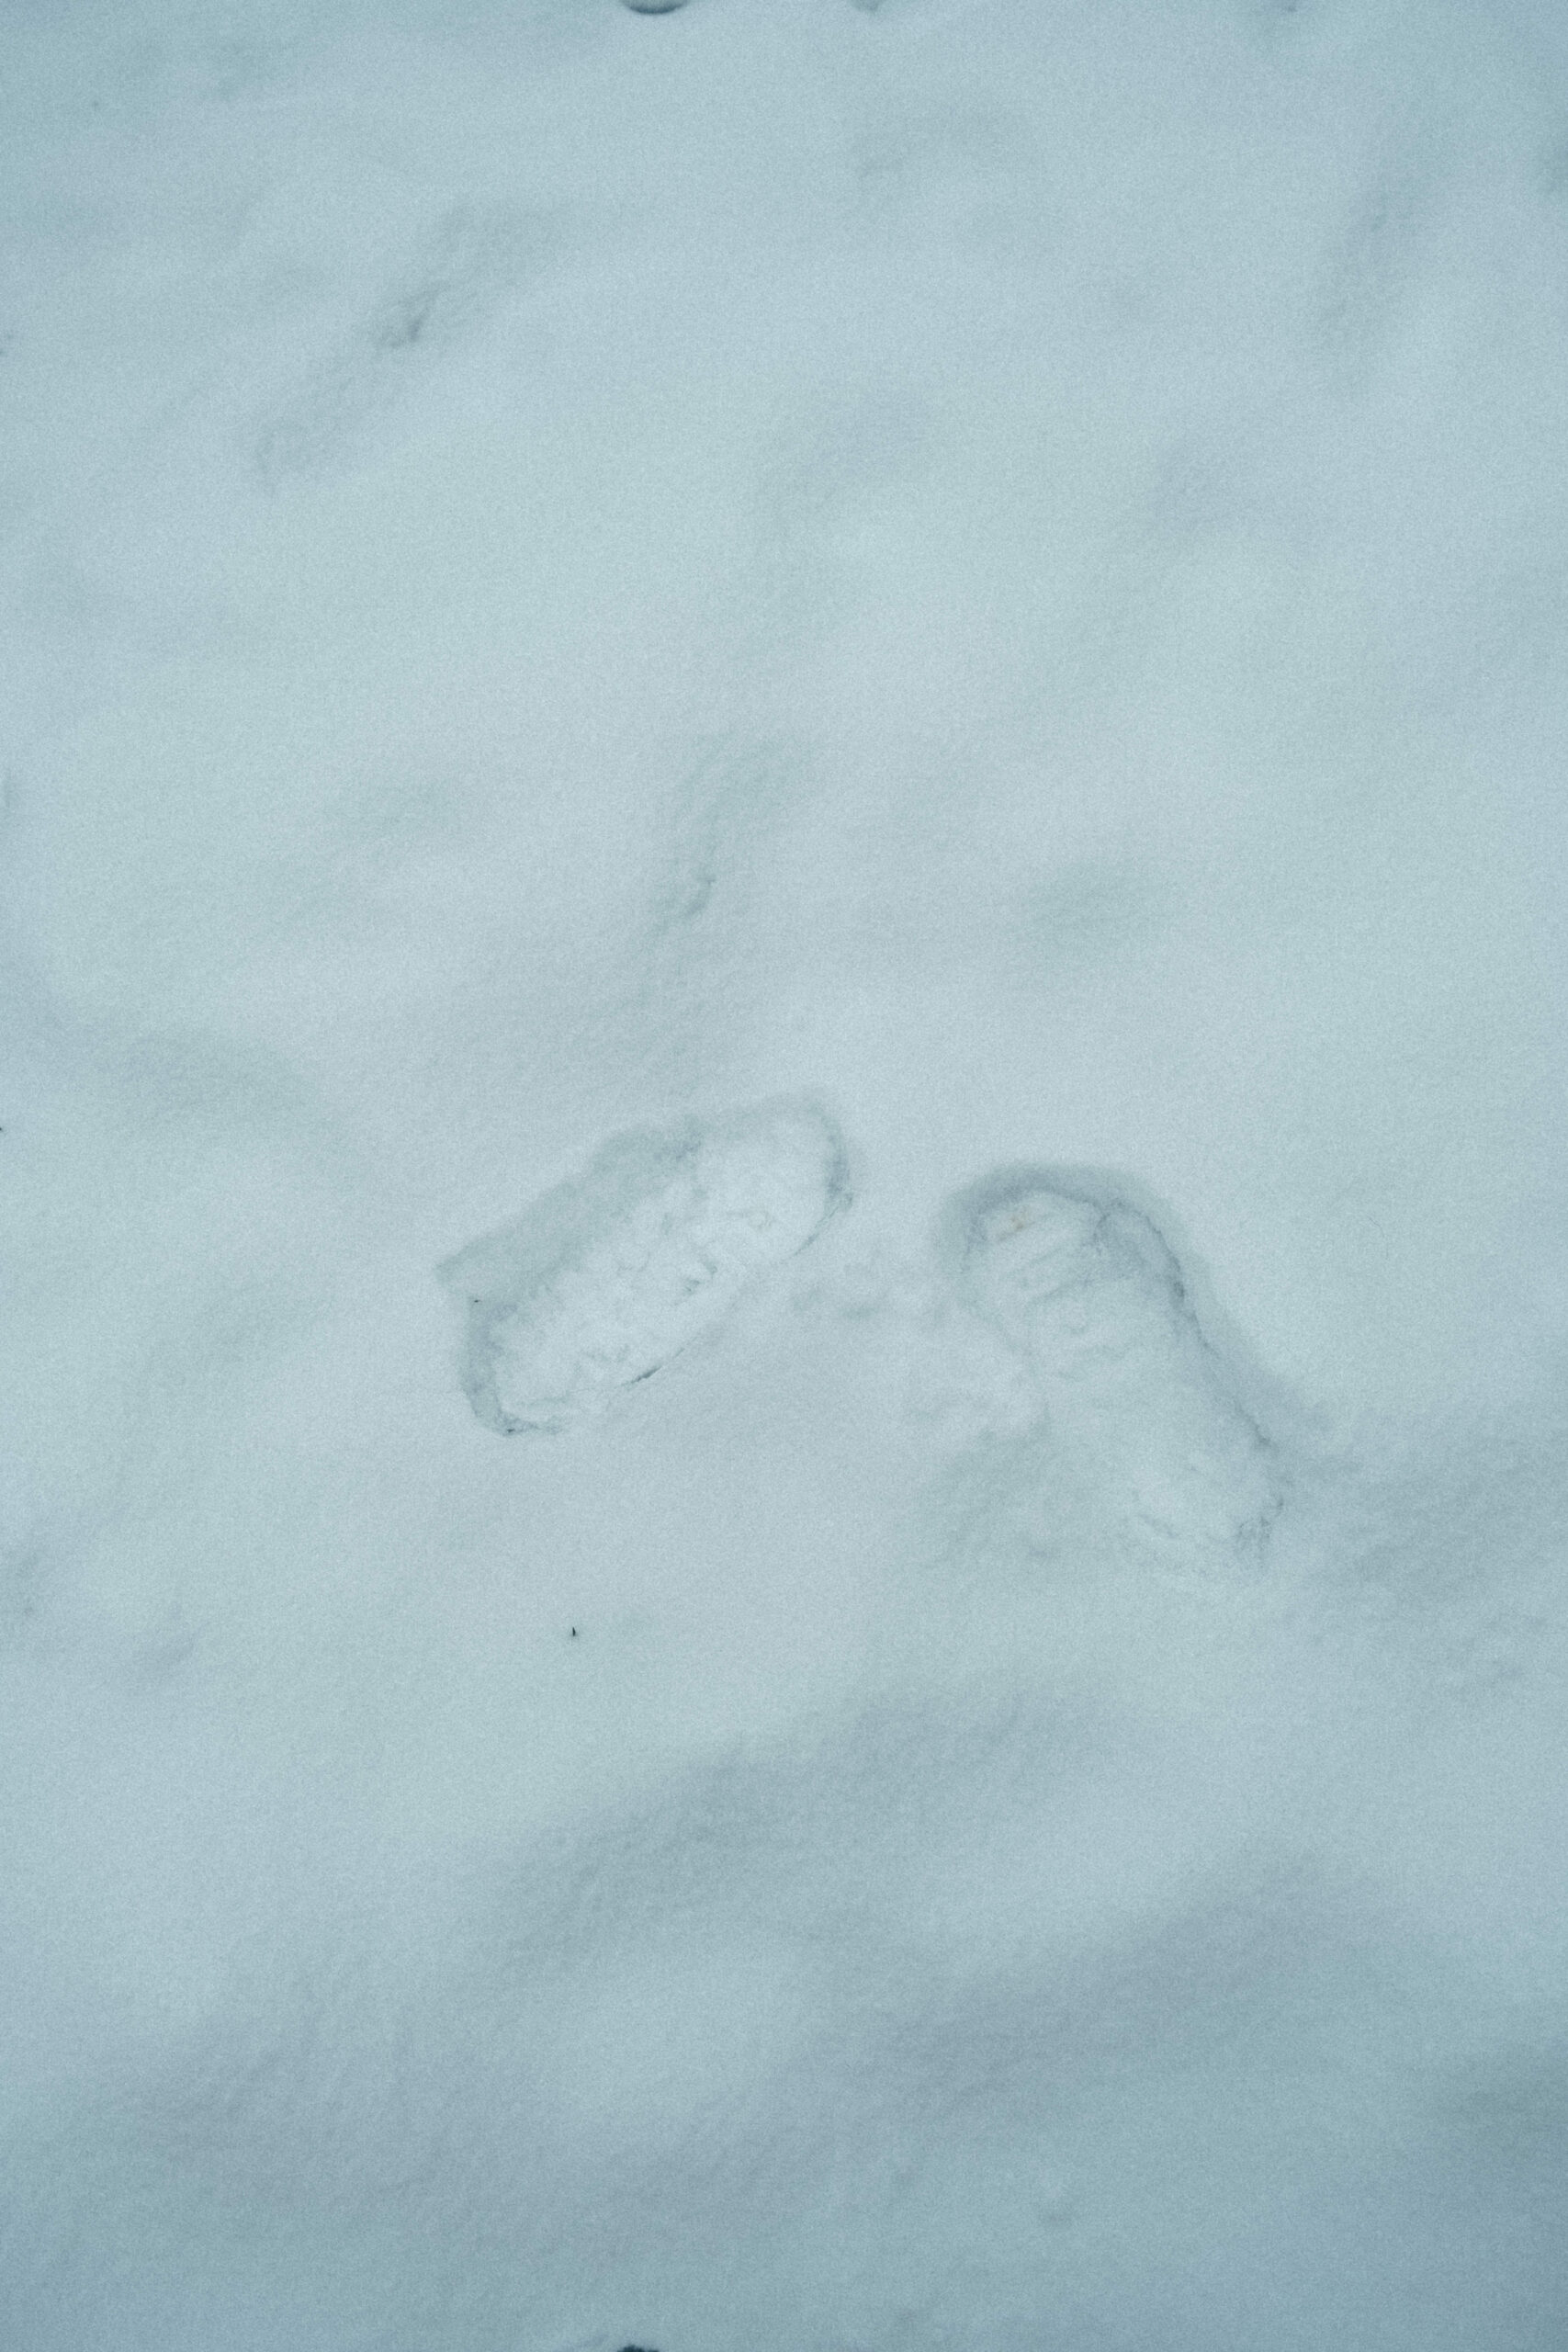 two foot prints in the snow